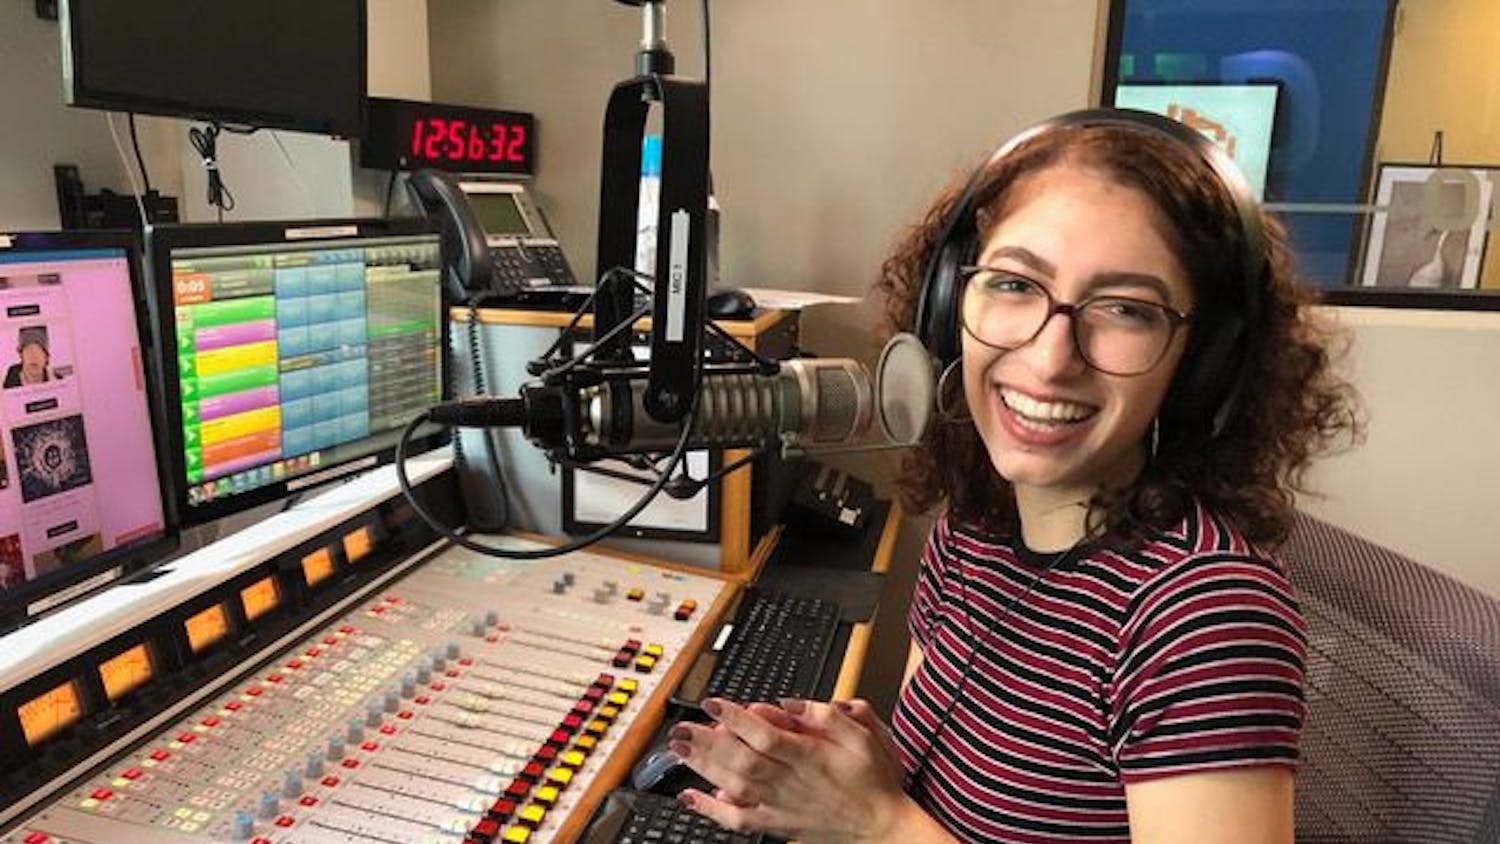 Cady Casellas, a 20-year-old UF telecommunication junior, hosts her new radio show, “Chisme Con Cady” from Weimer Hall.